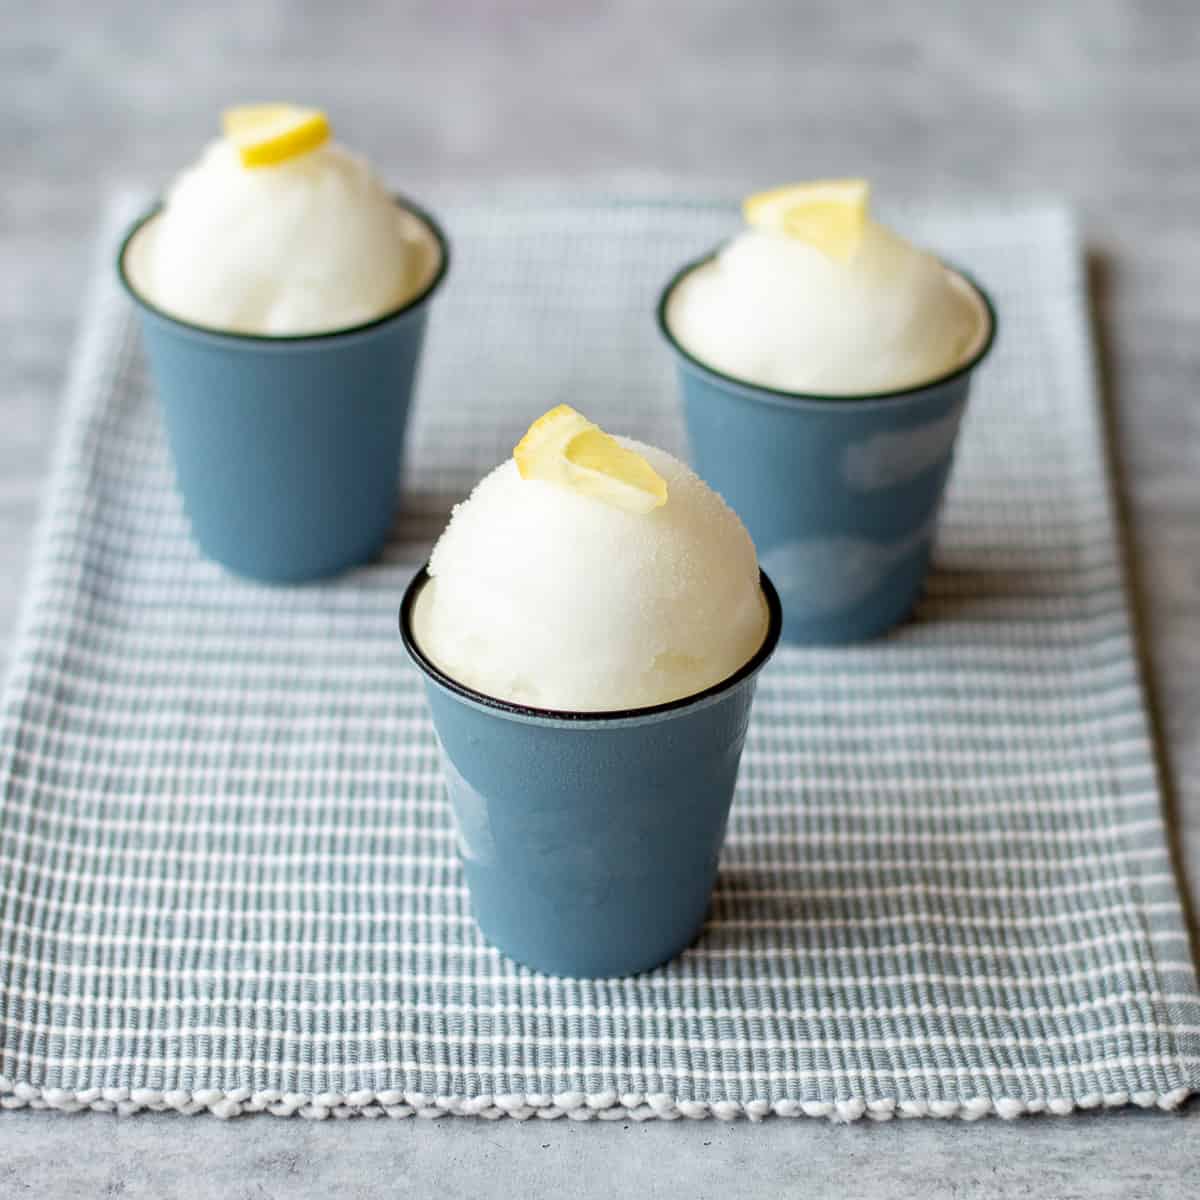 3 gin and tonic sorbets garnished with lemon wedges